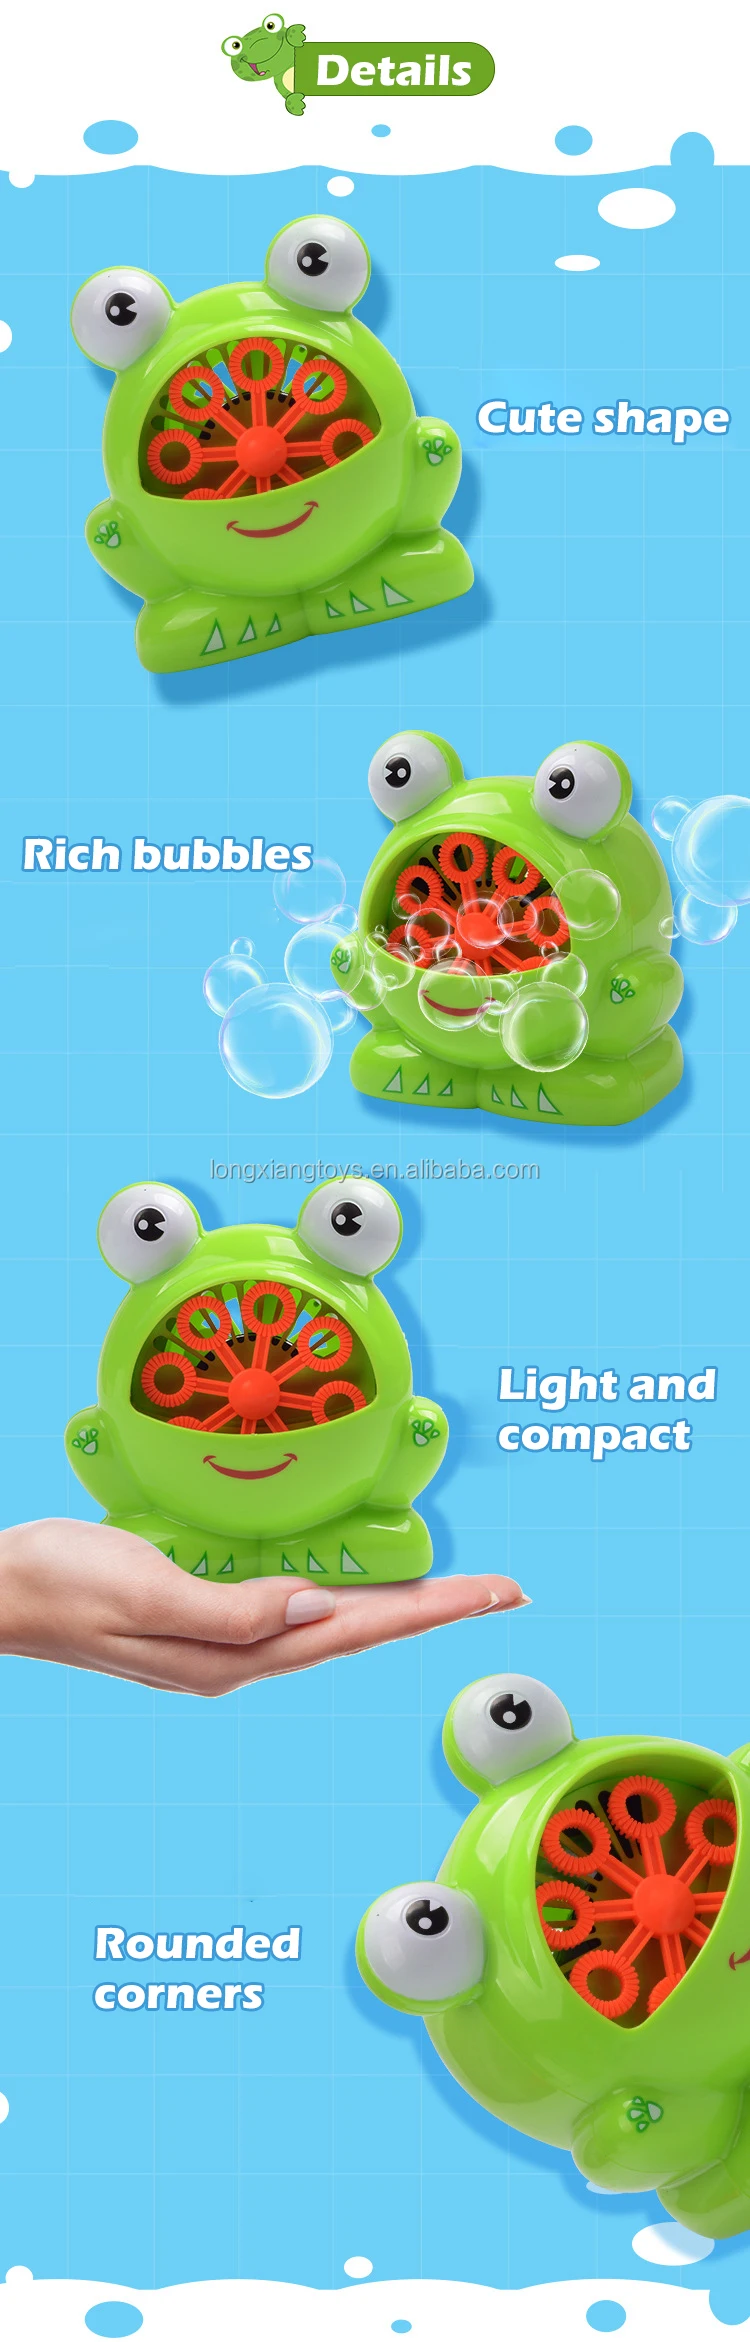 Electric Frog Bubble Machine  Soap Bubble  Game Blower Toys For Sale